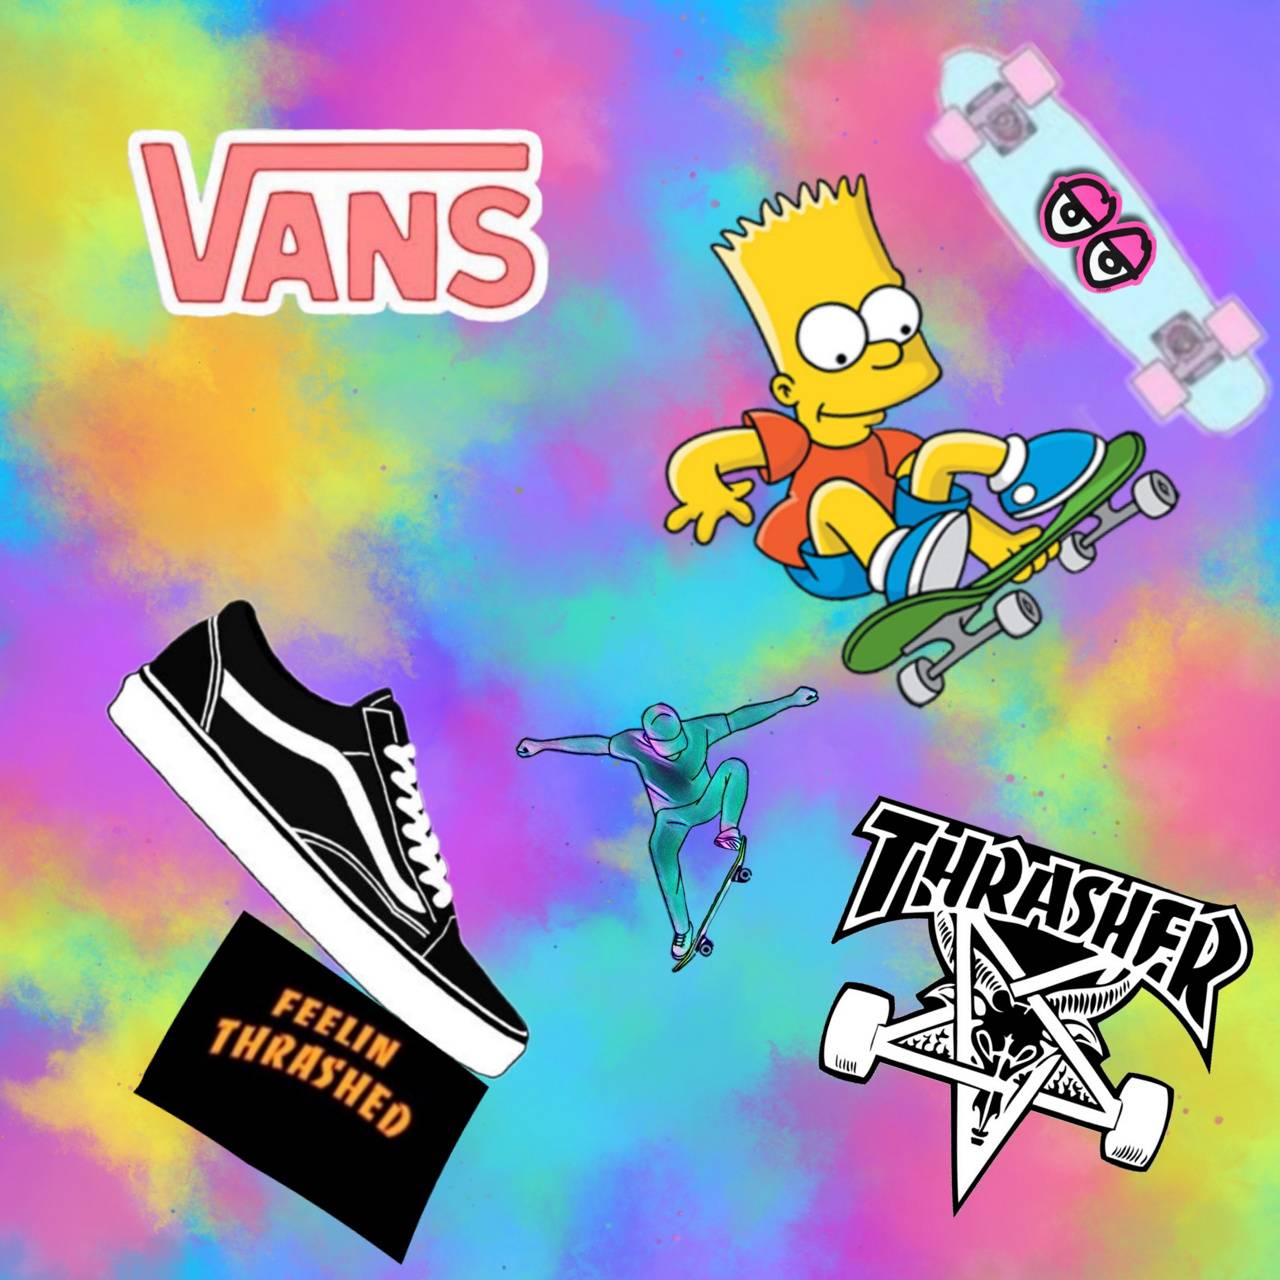 A tie-dye background with Vans, Thrasher, and The Simpsons logos on it. - Vans